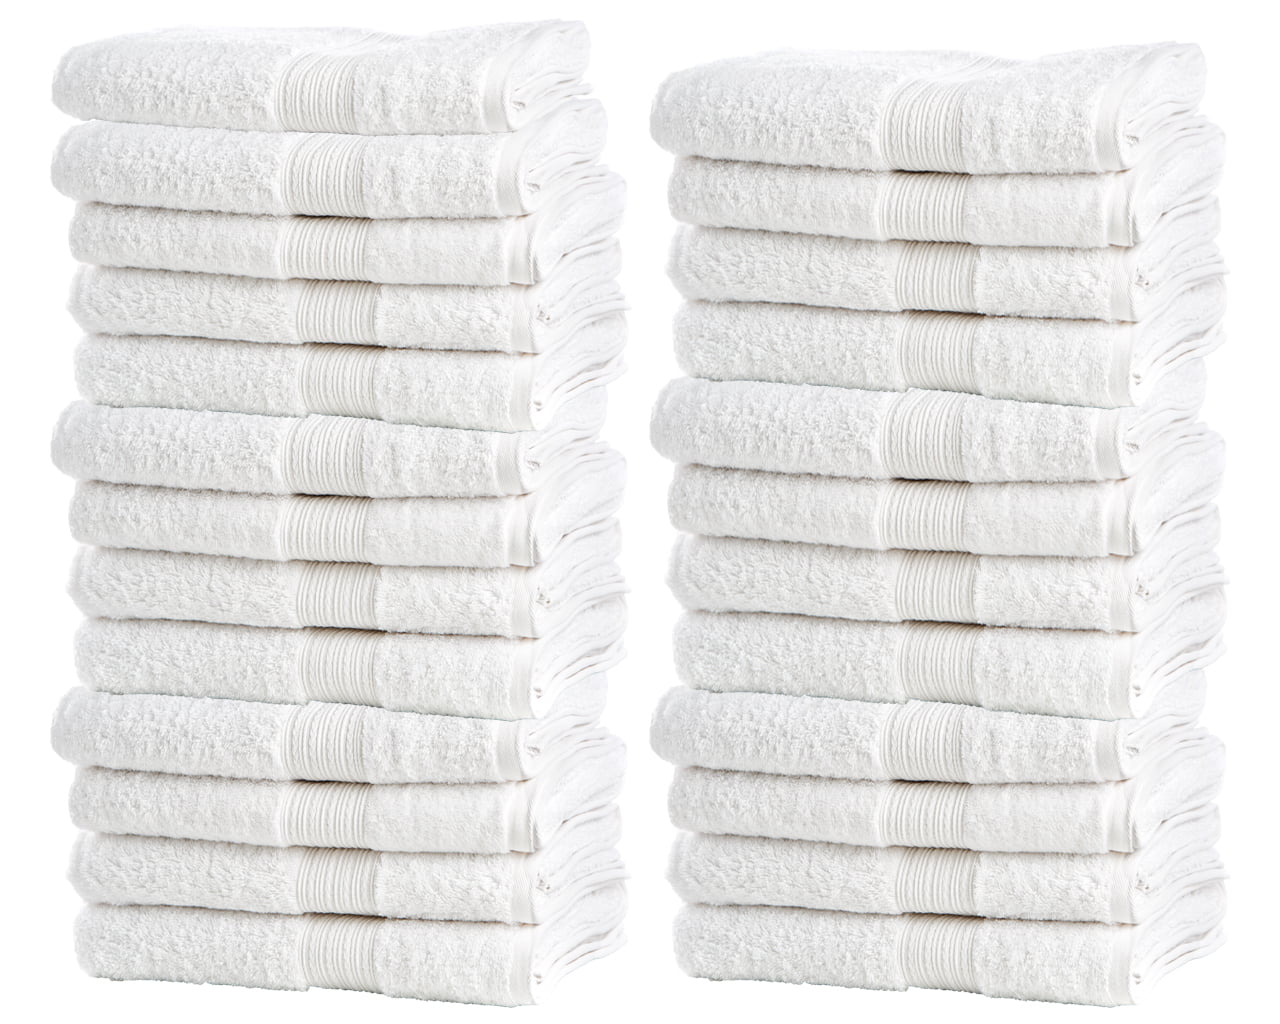 24 Pk Wash Cloth 12x12 Face/Gym/hotels & Households 100% Cotton 1 lb Quality. 